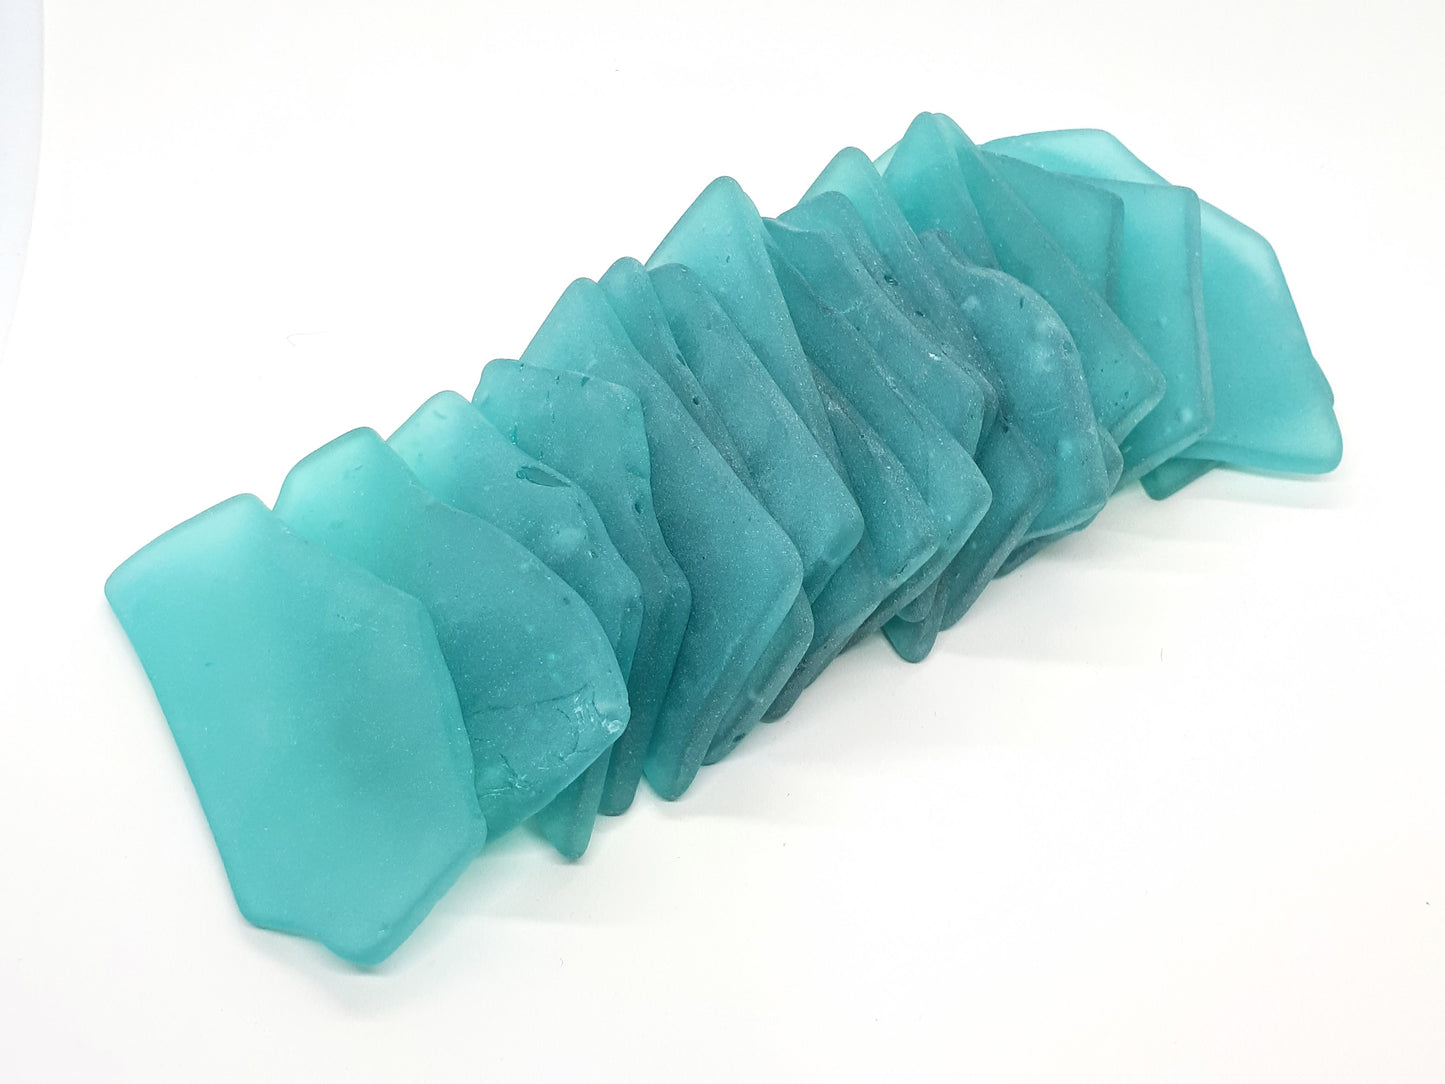 Teal Sea Glass Place Cards - Set of 20 - Irregular Shaped Pieces